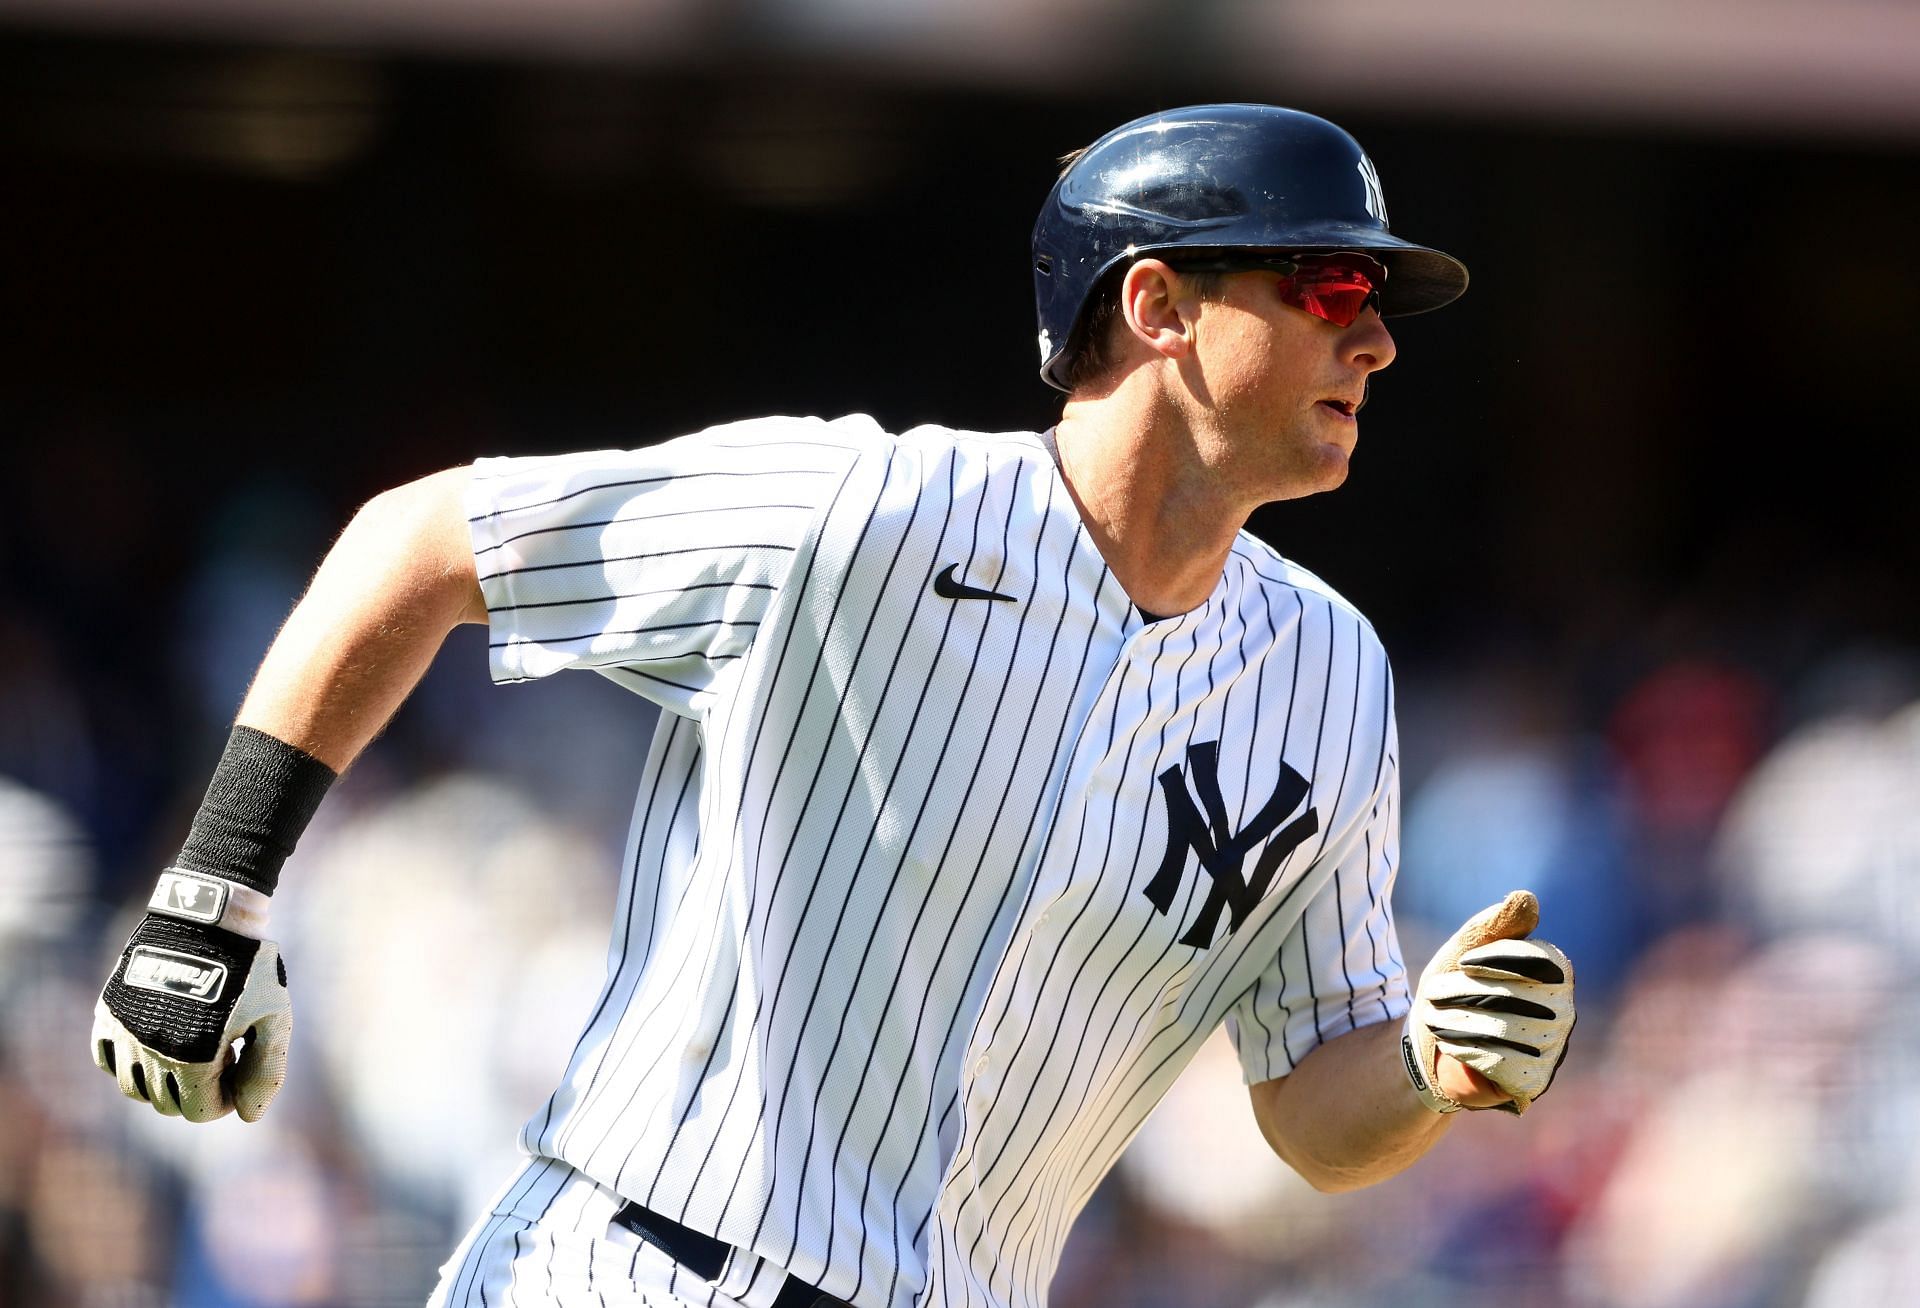 Rumor: The extremely painful reason Yankees' DJ LeMahieu took big step back  in 2021